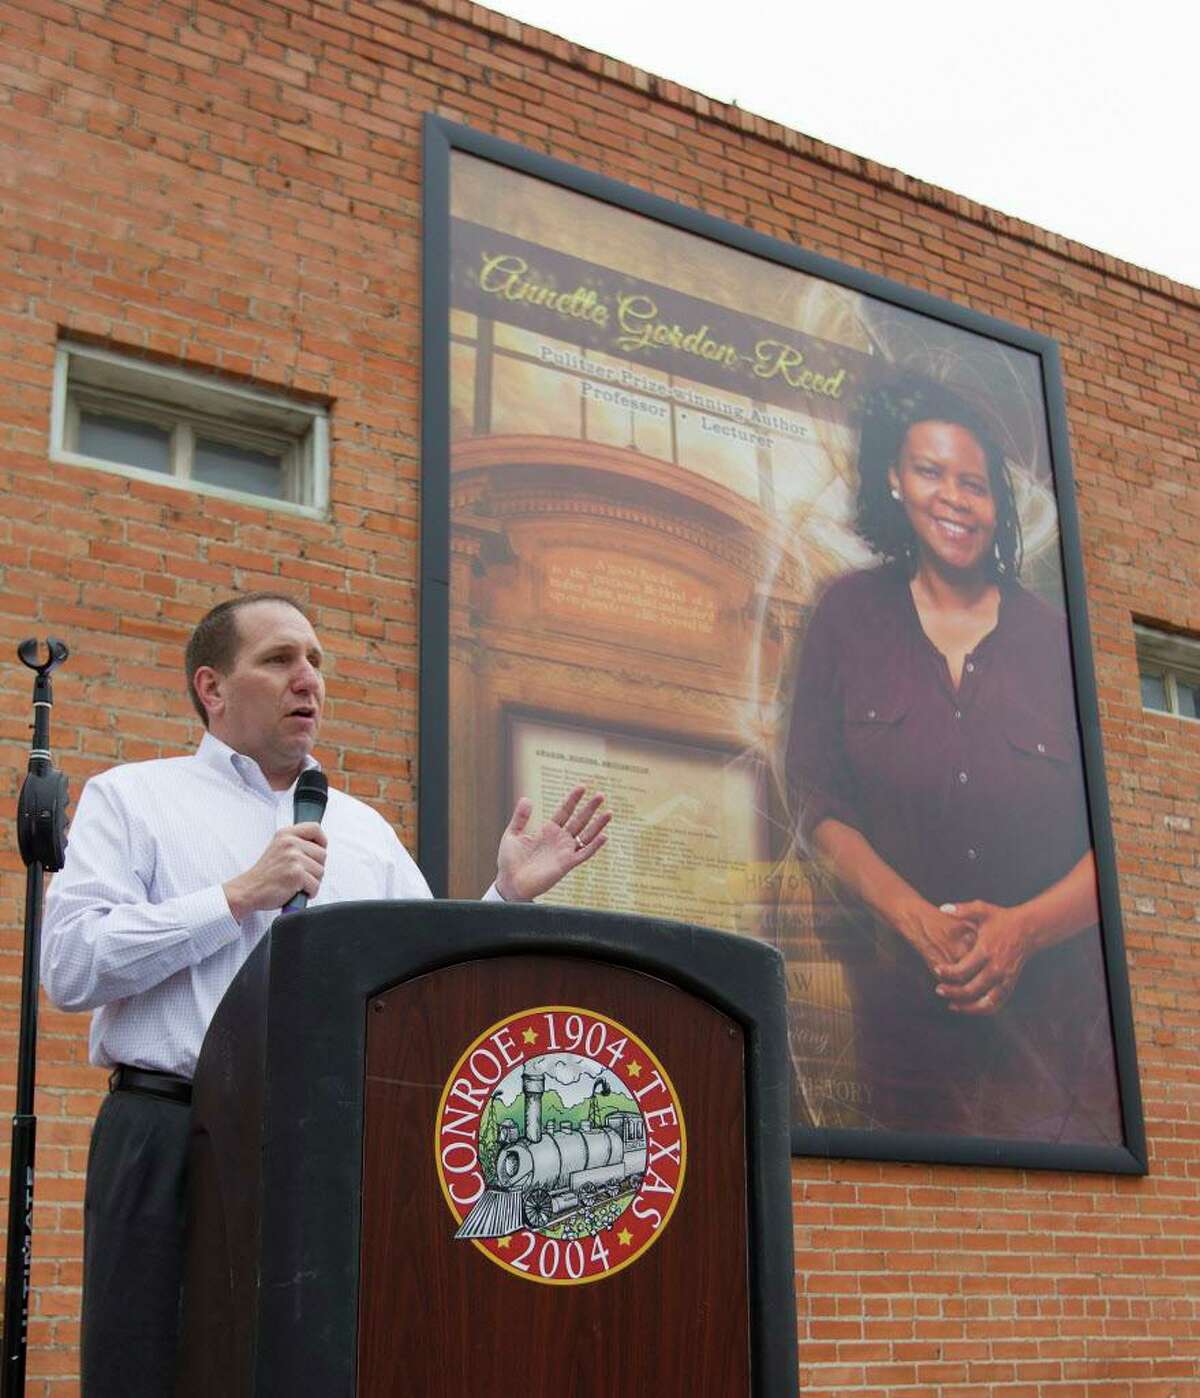 Dr. Curtis Null, then deputy superintendent of schools at Conroe ISD, speaks during the unveiling of a mural in honor of Annette Gordon-Reed at North Main Street and Metcalf Street, Saturday, April 22, 2017, in Conroe. The fourth addition to the Conroe Legends mural wall honored the 1977 graduate of Conroe High School and winner of the 2009 Pulitzer Prize in History.